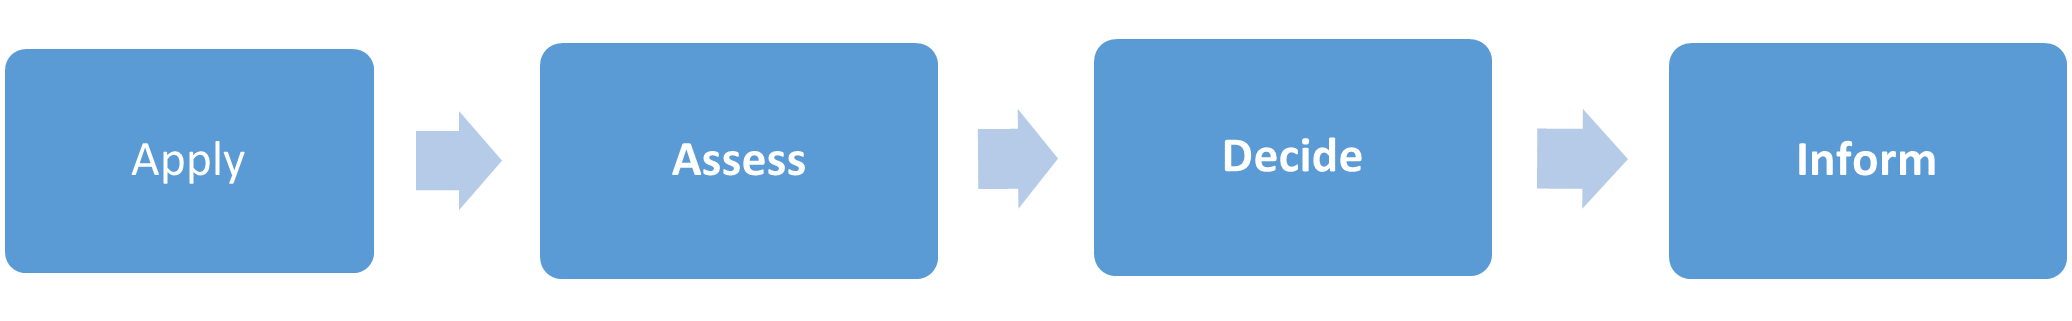 Blue rectangles with arrows pointing to the right. From left to right: 1. Apply, 2. Assess, 3. Decide, 4. Inform